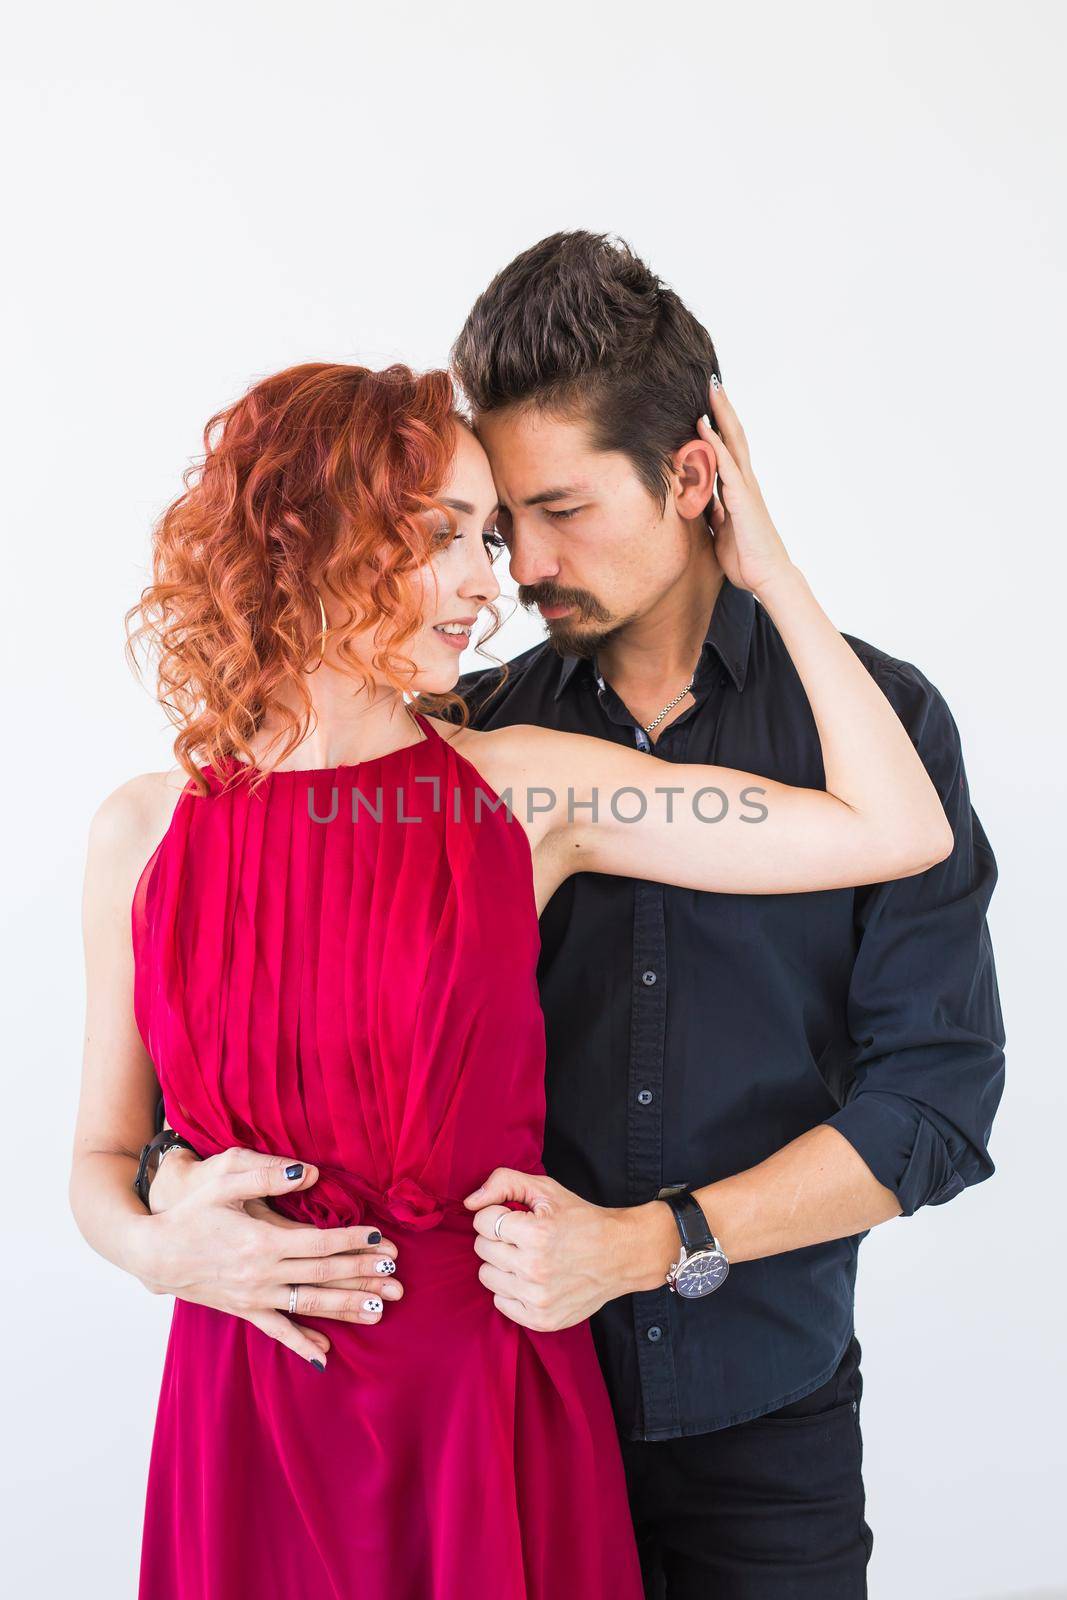 Romantic, social dance, people concept - couple dancing in the studio, man hugging the woman from her back.